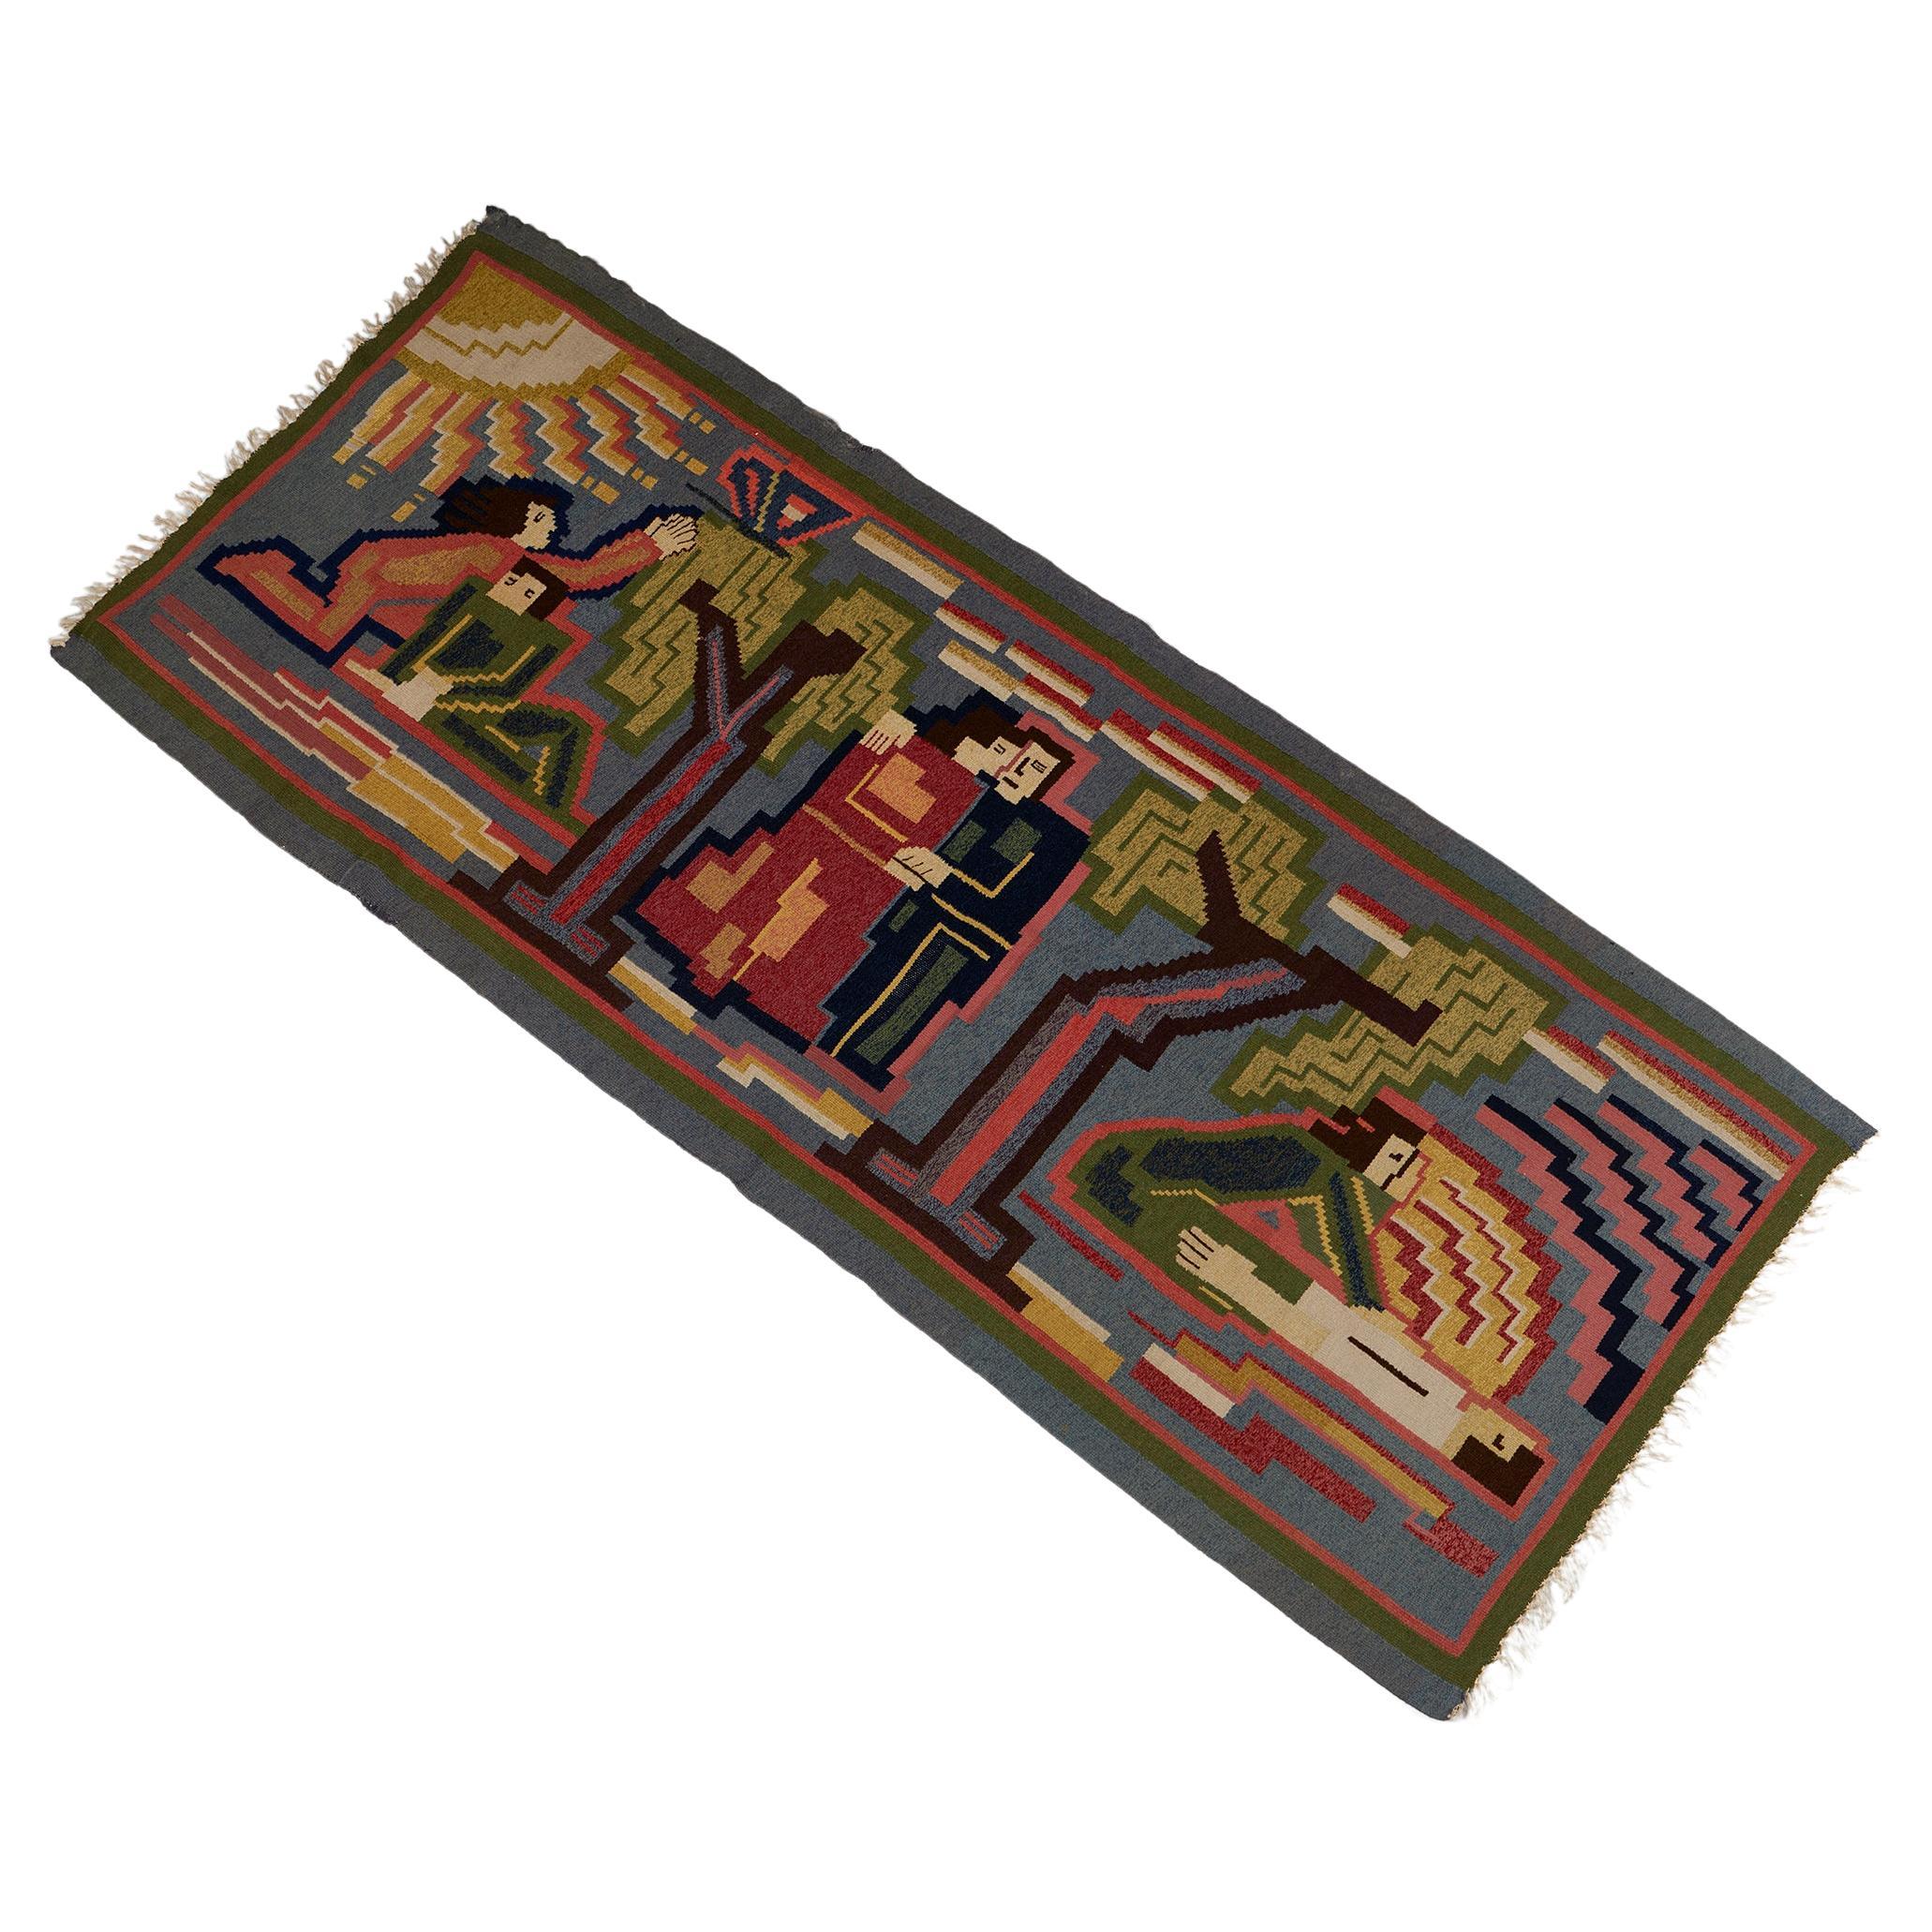 Tapestry ‘Three Ages’ Designed by Nils Nilsson, Belgium, 1920s For Sale